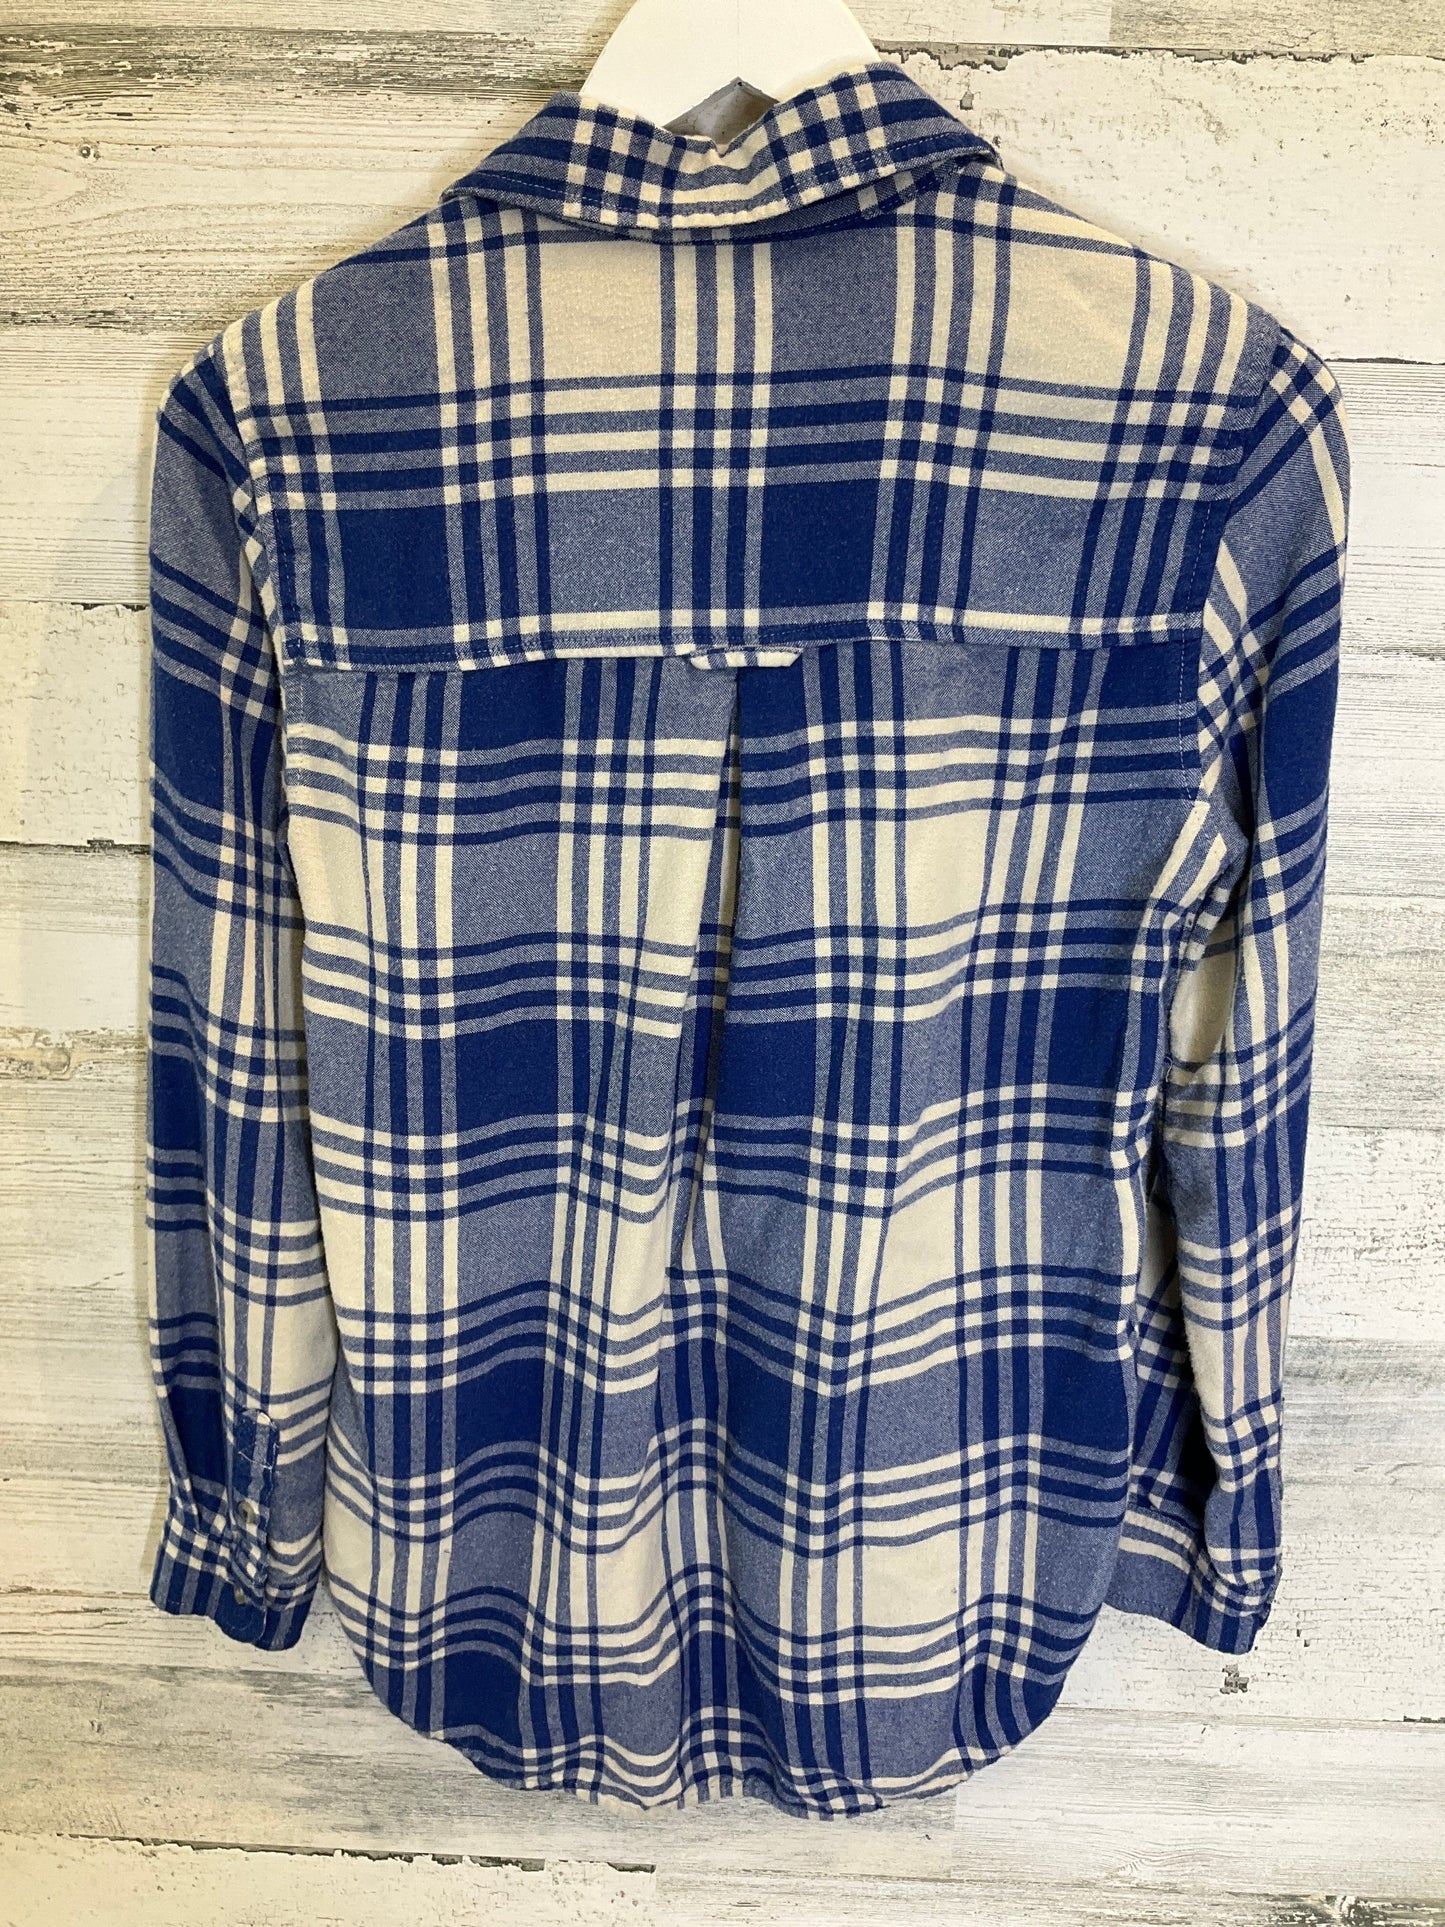 Blue & White Top Long Sleeve American Eagle, Size Xs